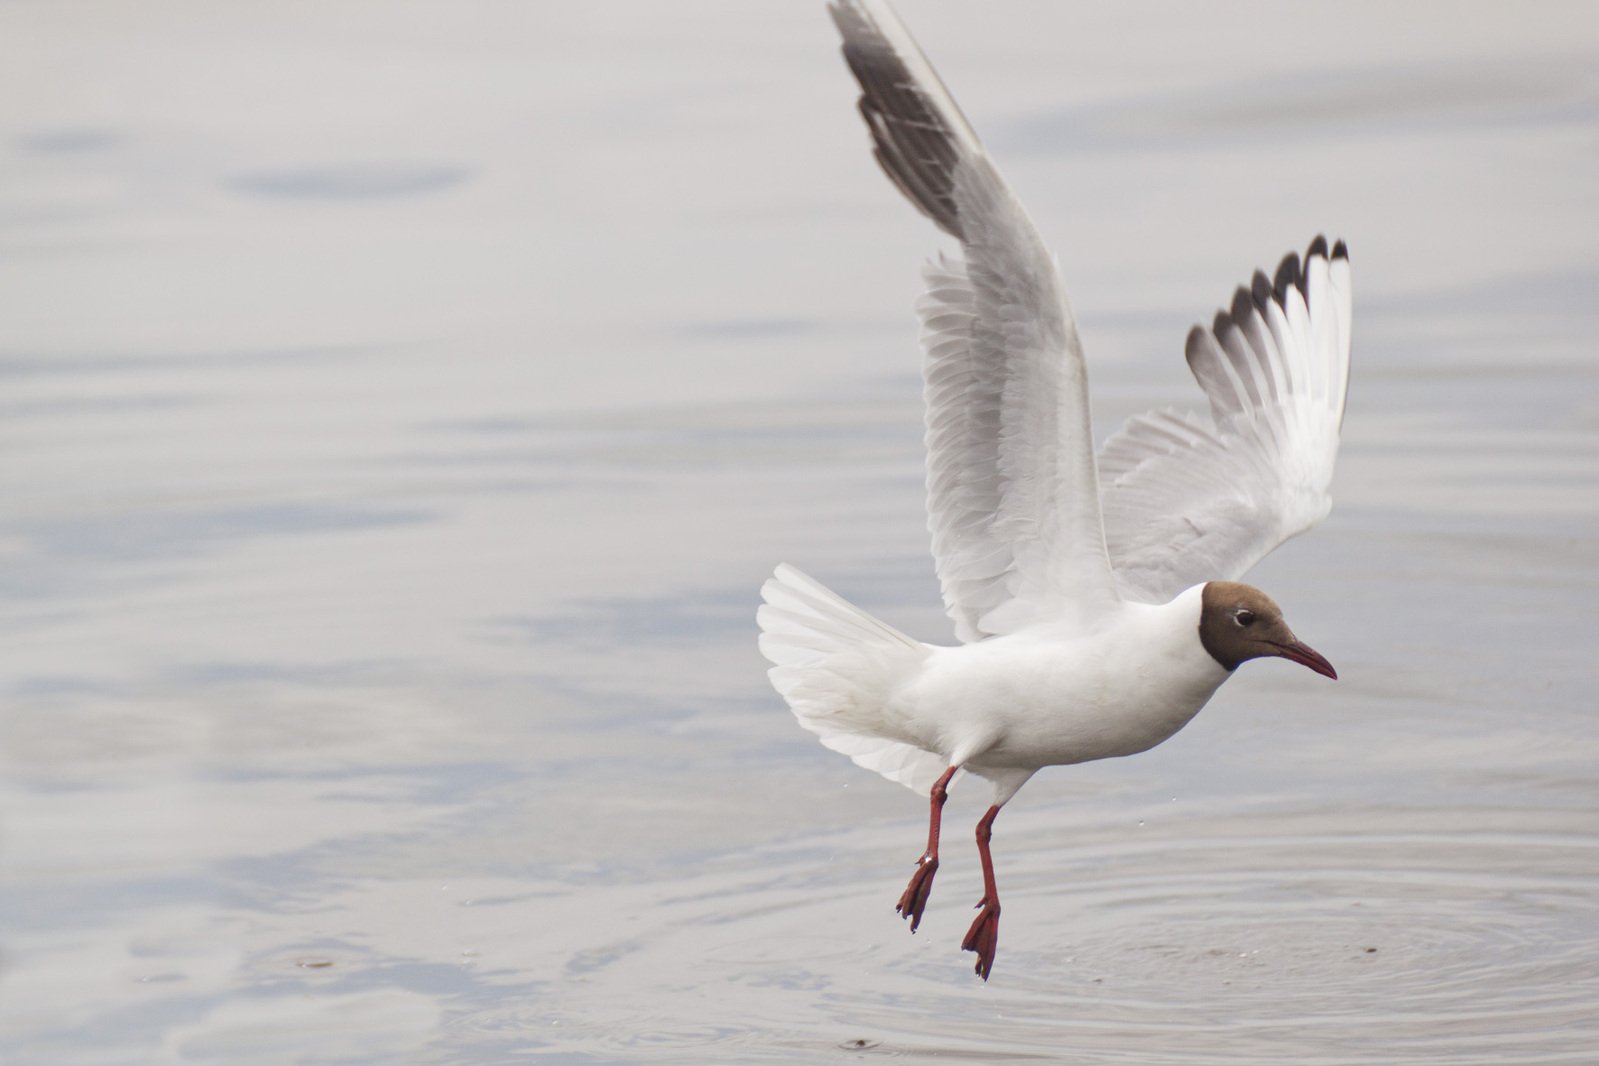 a white bird with its wings spread spread flying above the water